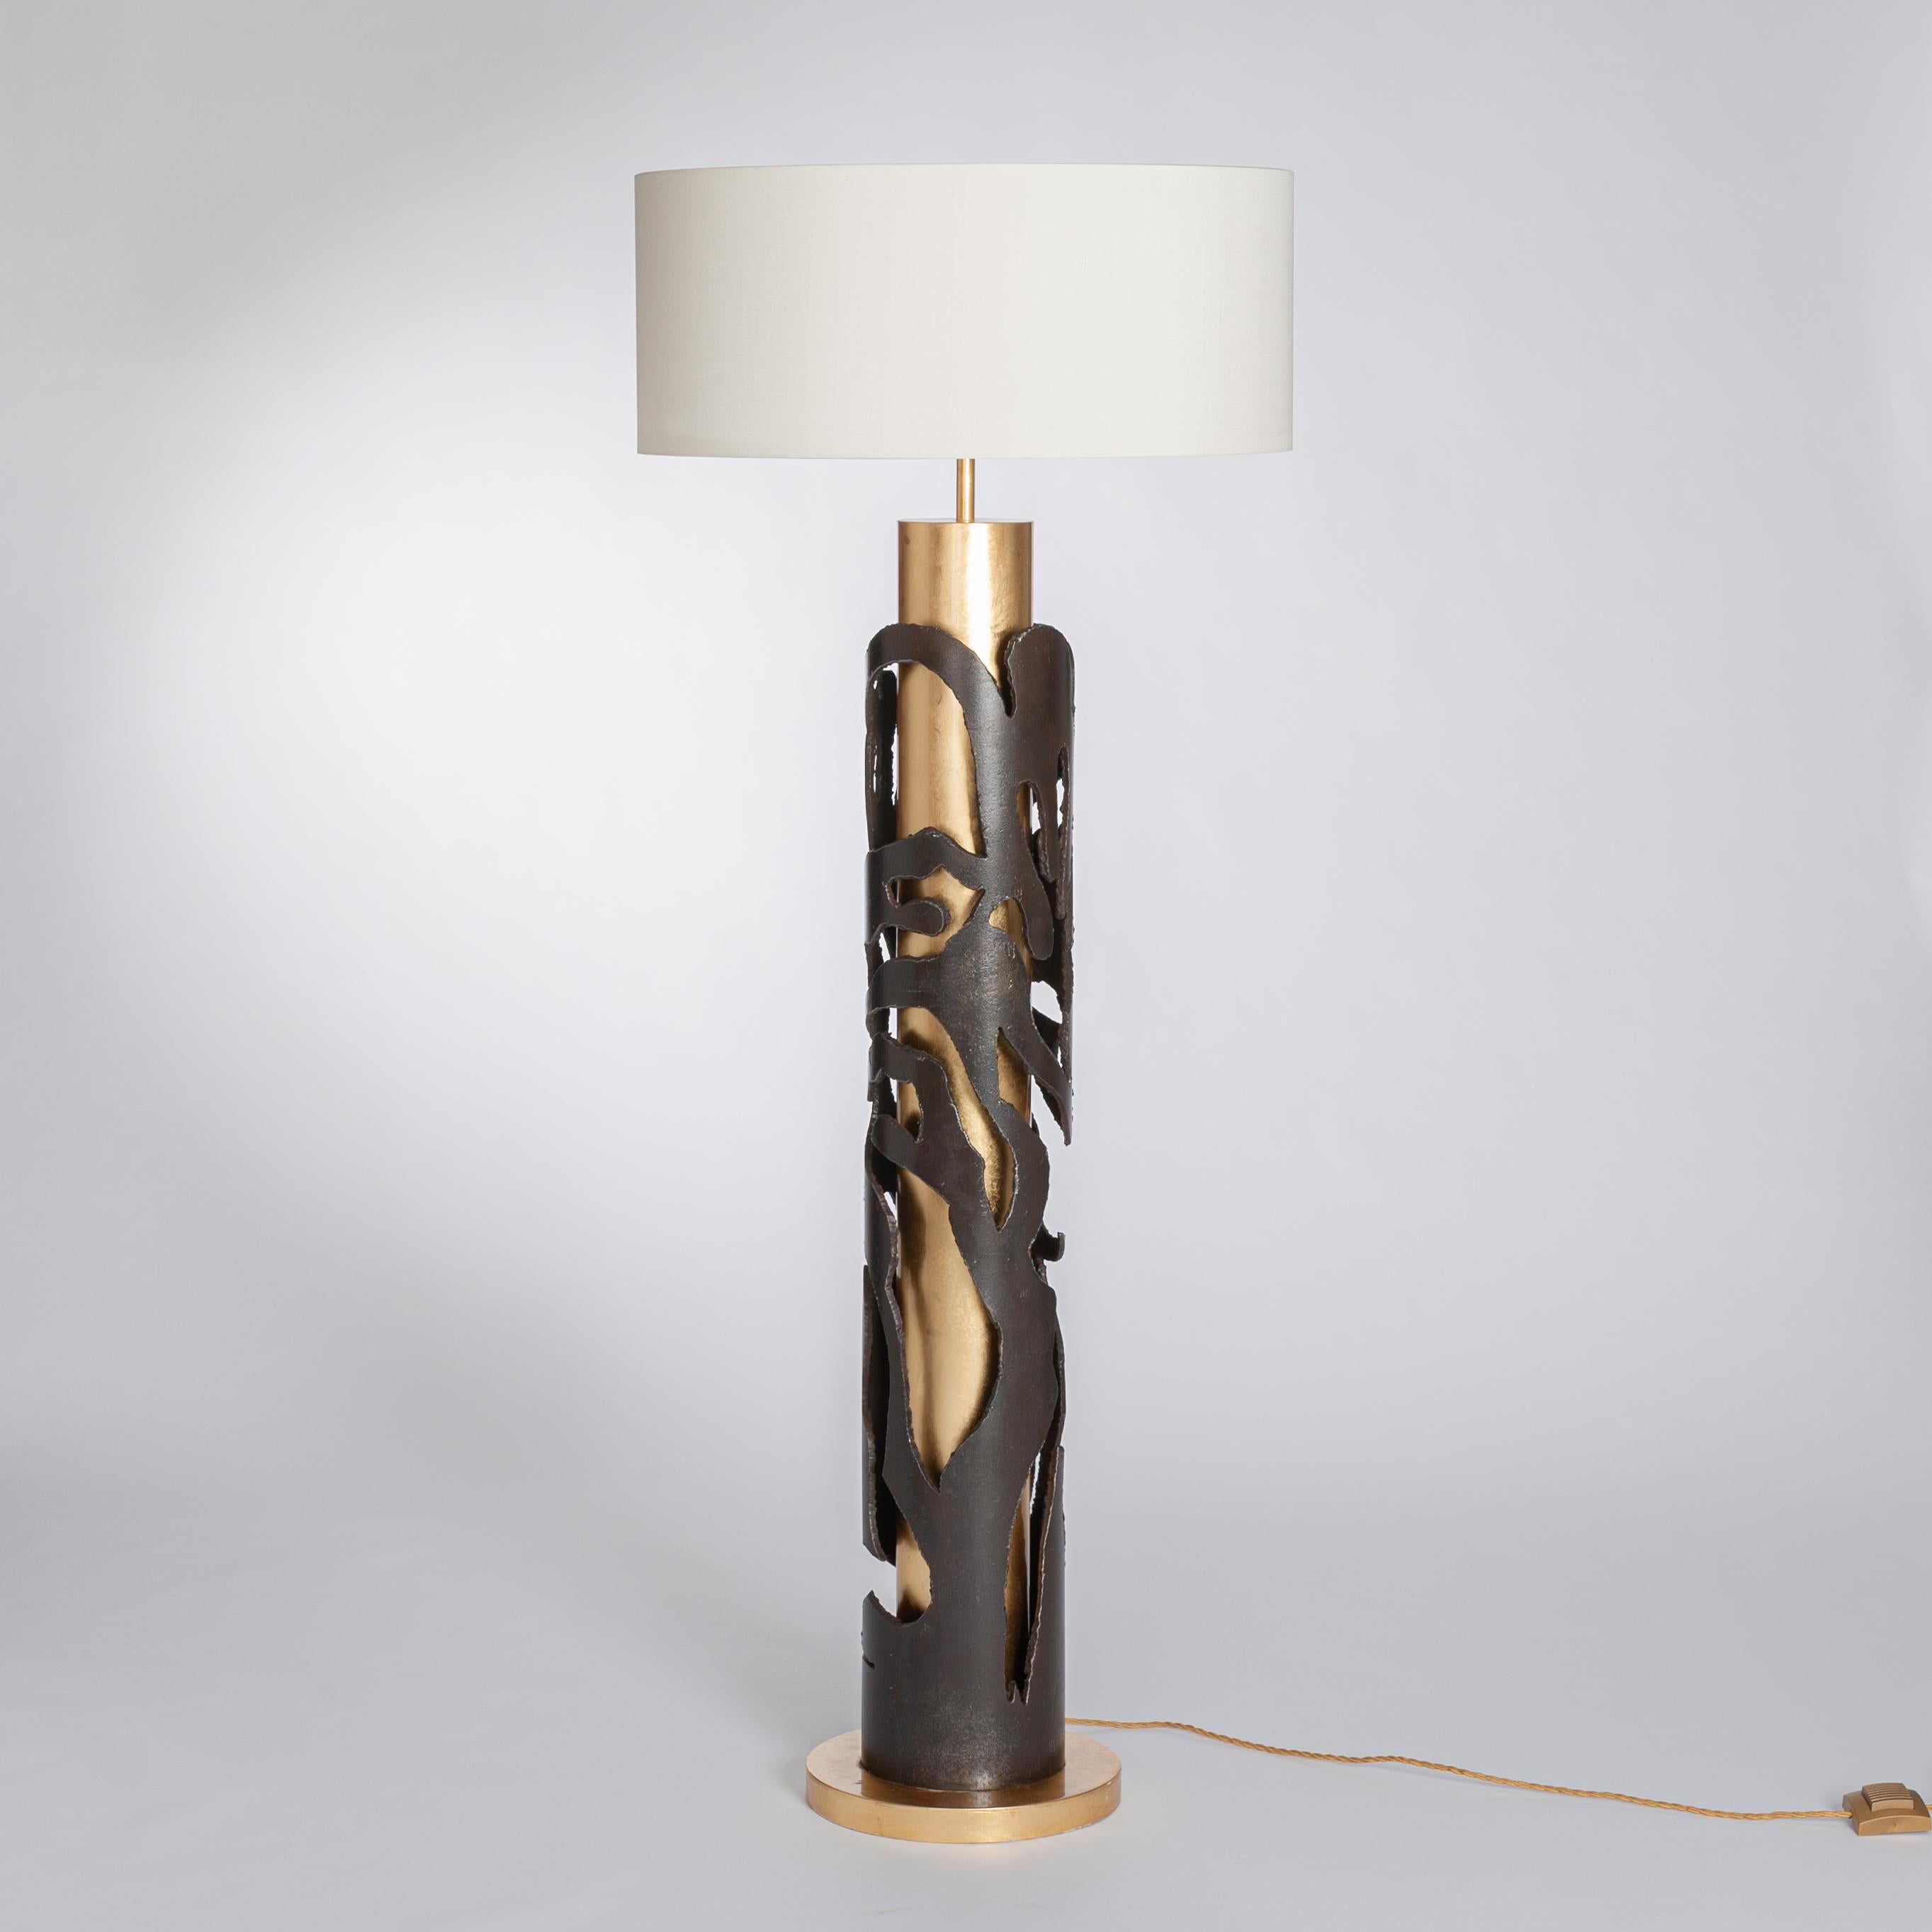 Extraordinary Italian, wrought iron floor lamp.
Gold-plated metal center foot and base - abstract exterior decoration painted dark brown.
Off-white colored lamp shade out of silk with following size: 60 x 30cm / 1-lit electrified.
Measures: Diameter